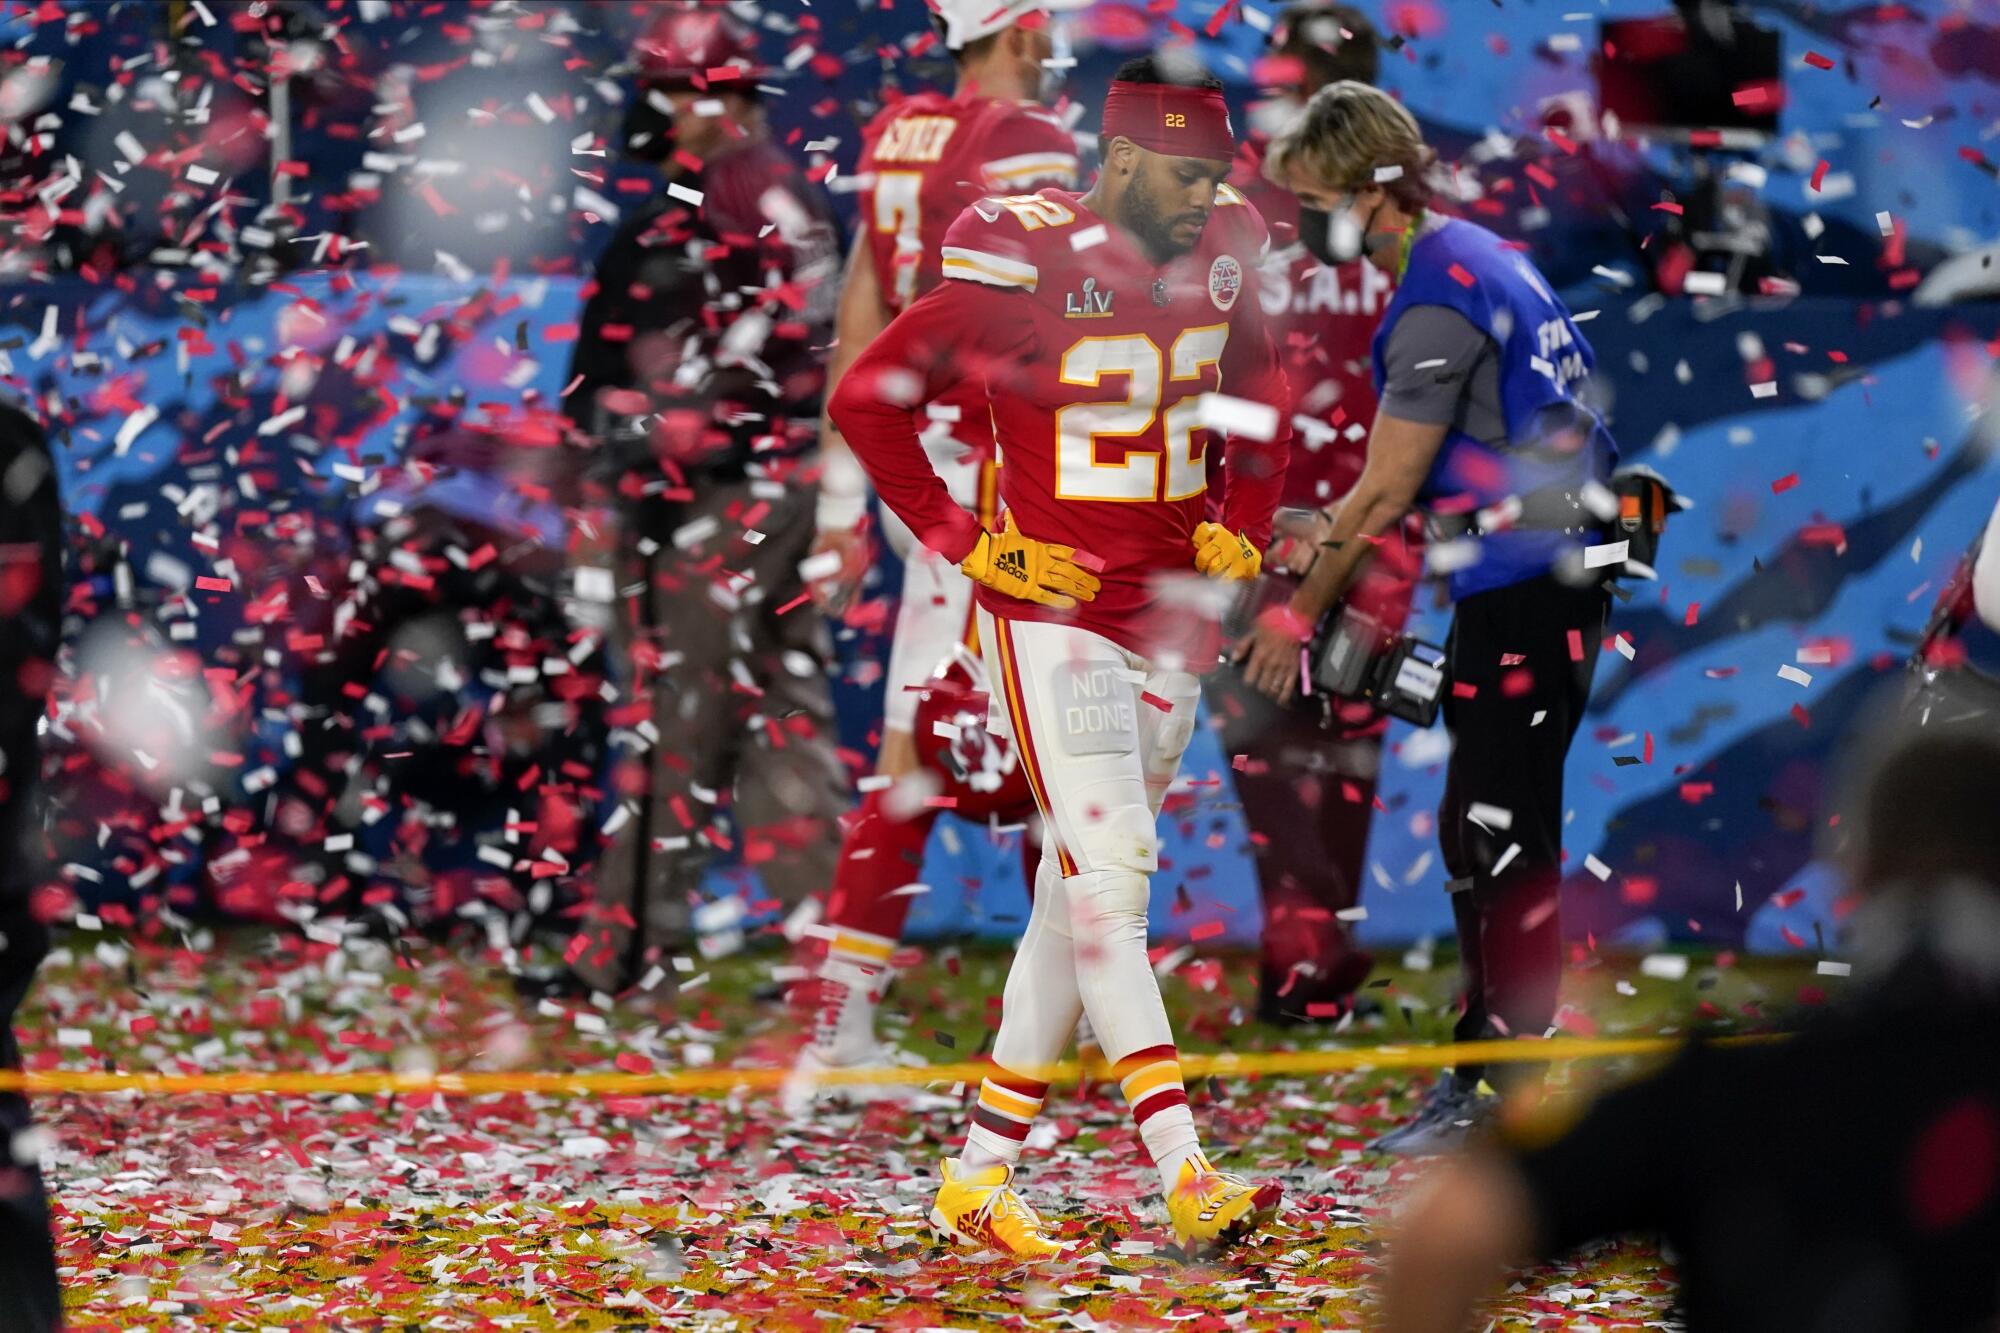 Kansas City safety Juan Thornhill leaves the field after the Chiefs' loss in Super Bowl LV.